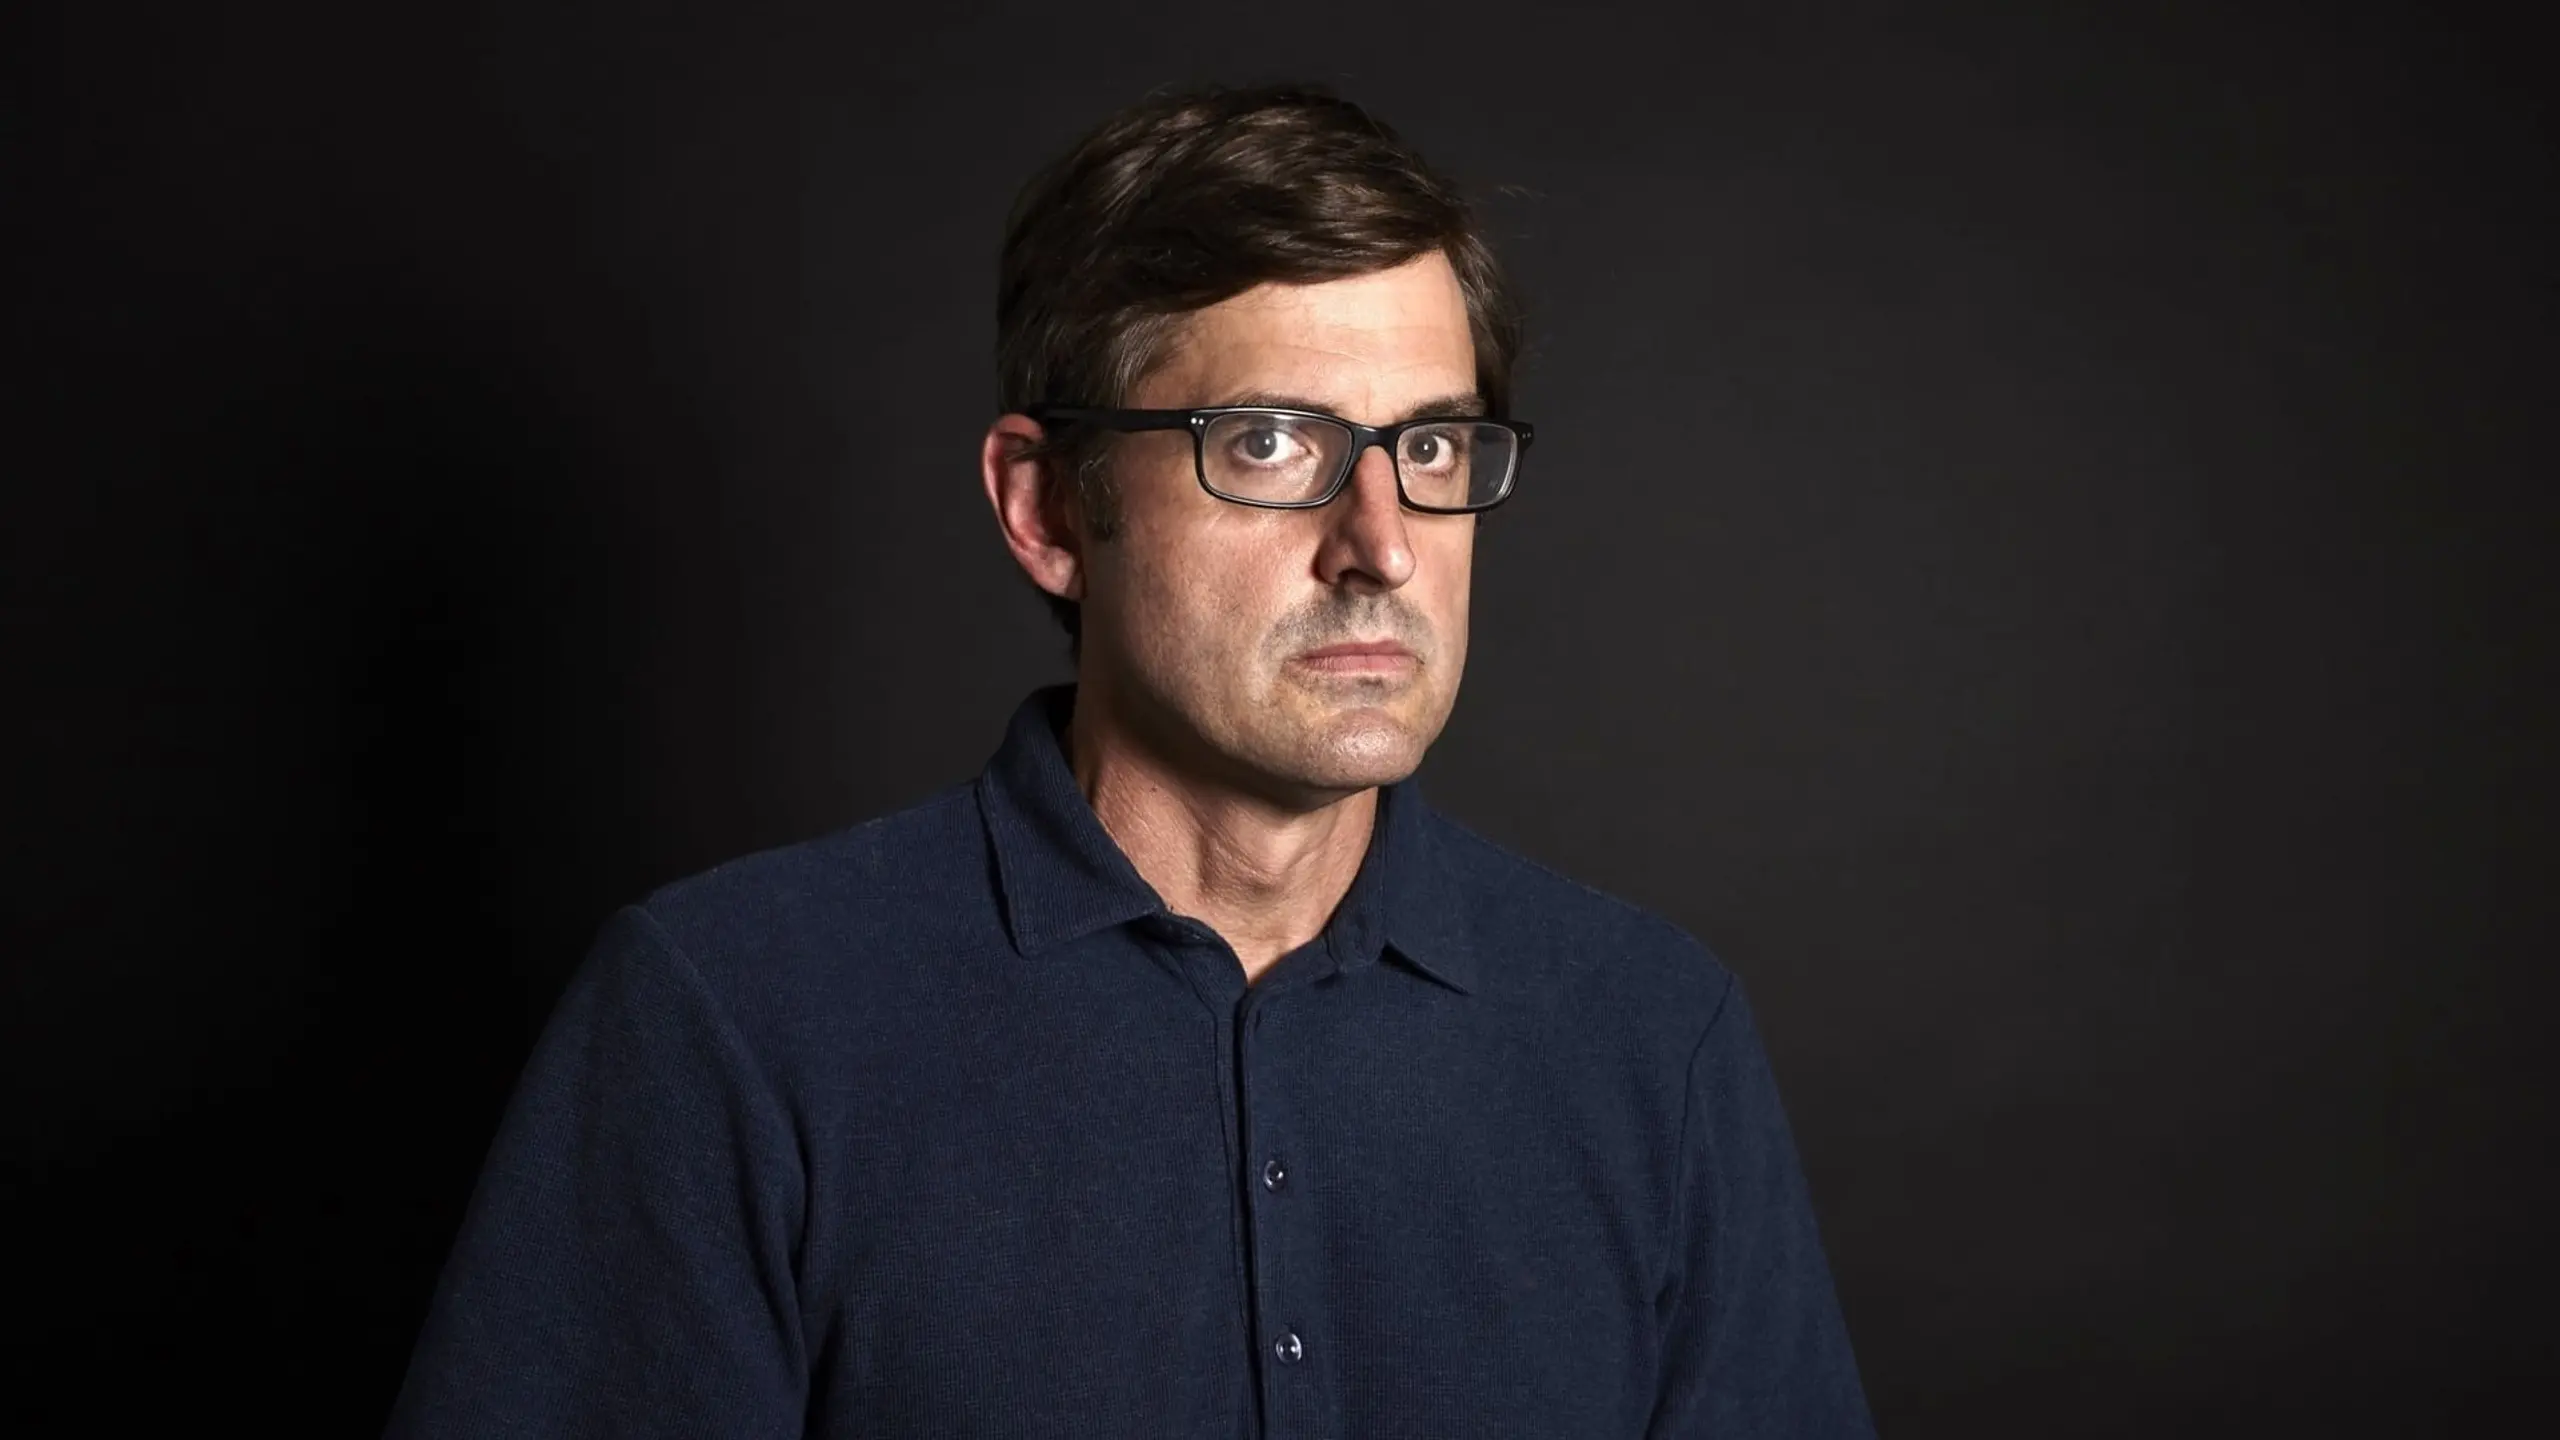 Louis Theroux: A Place for Paedophiles